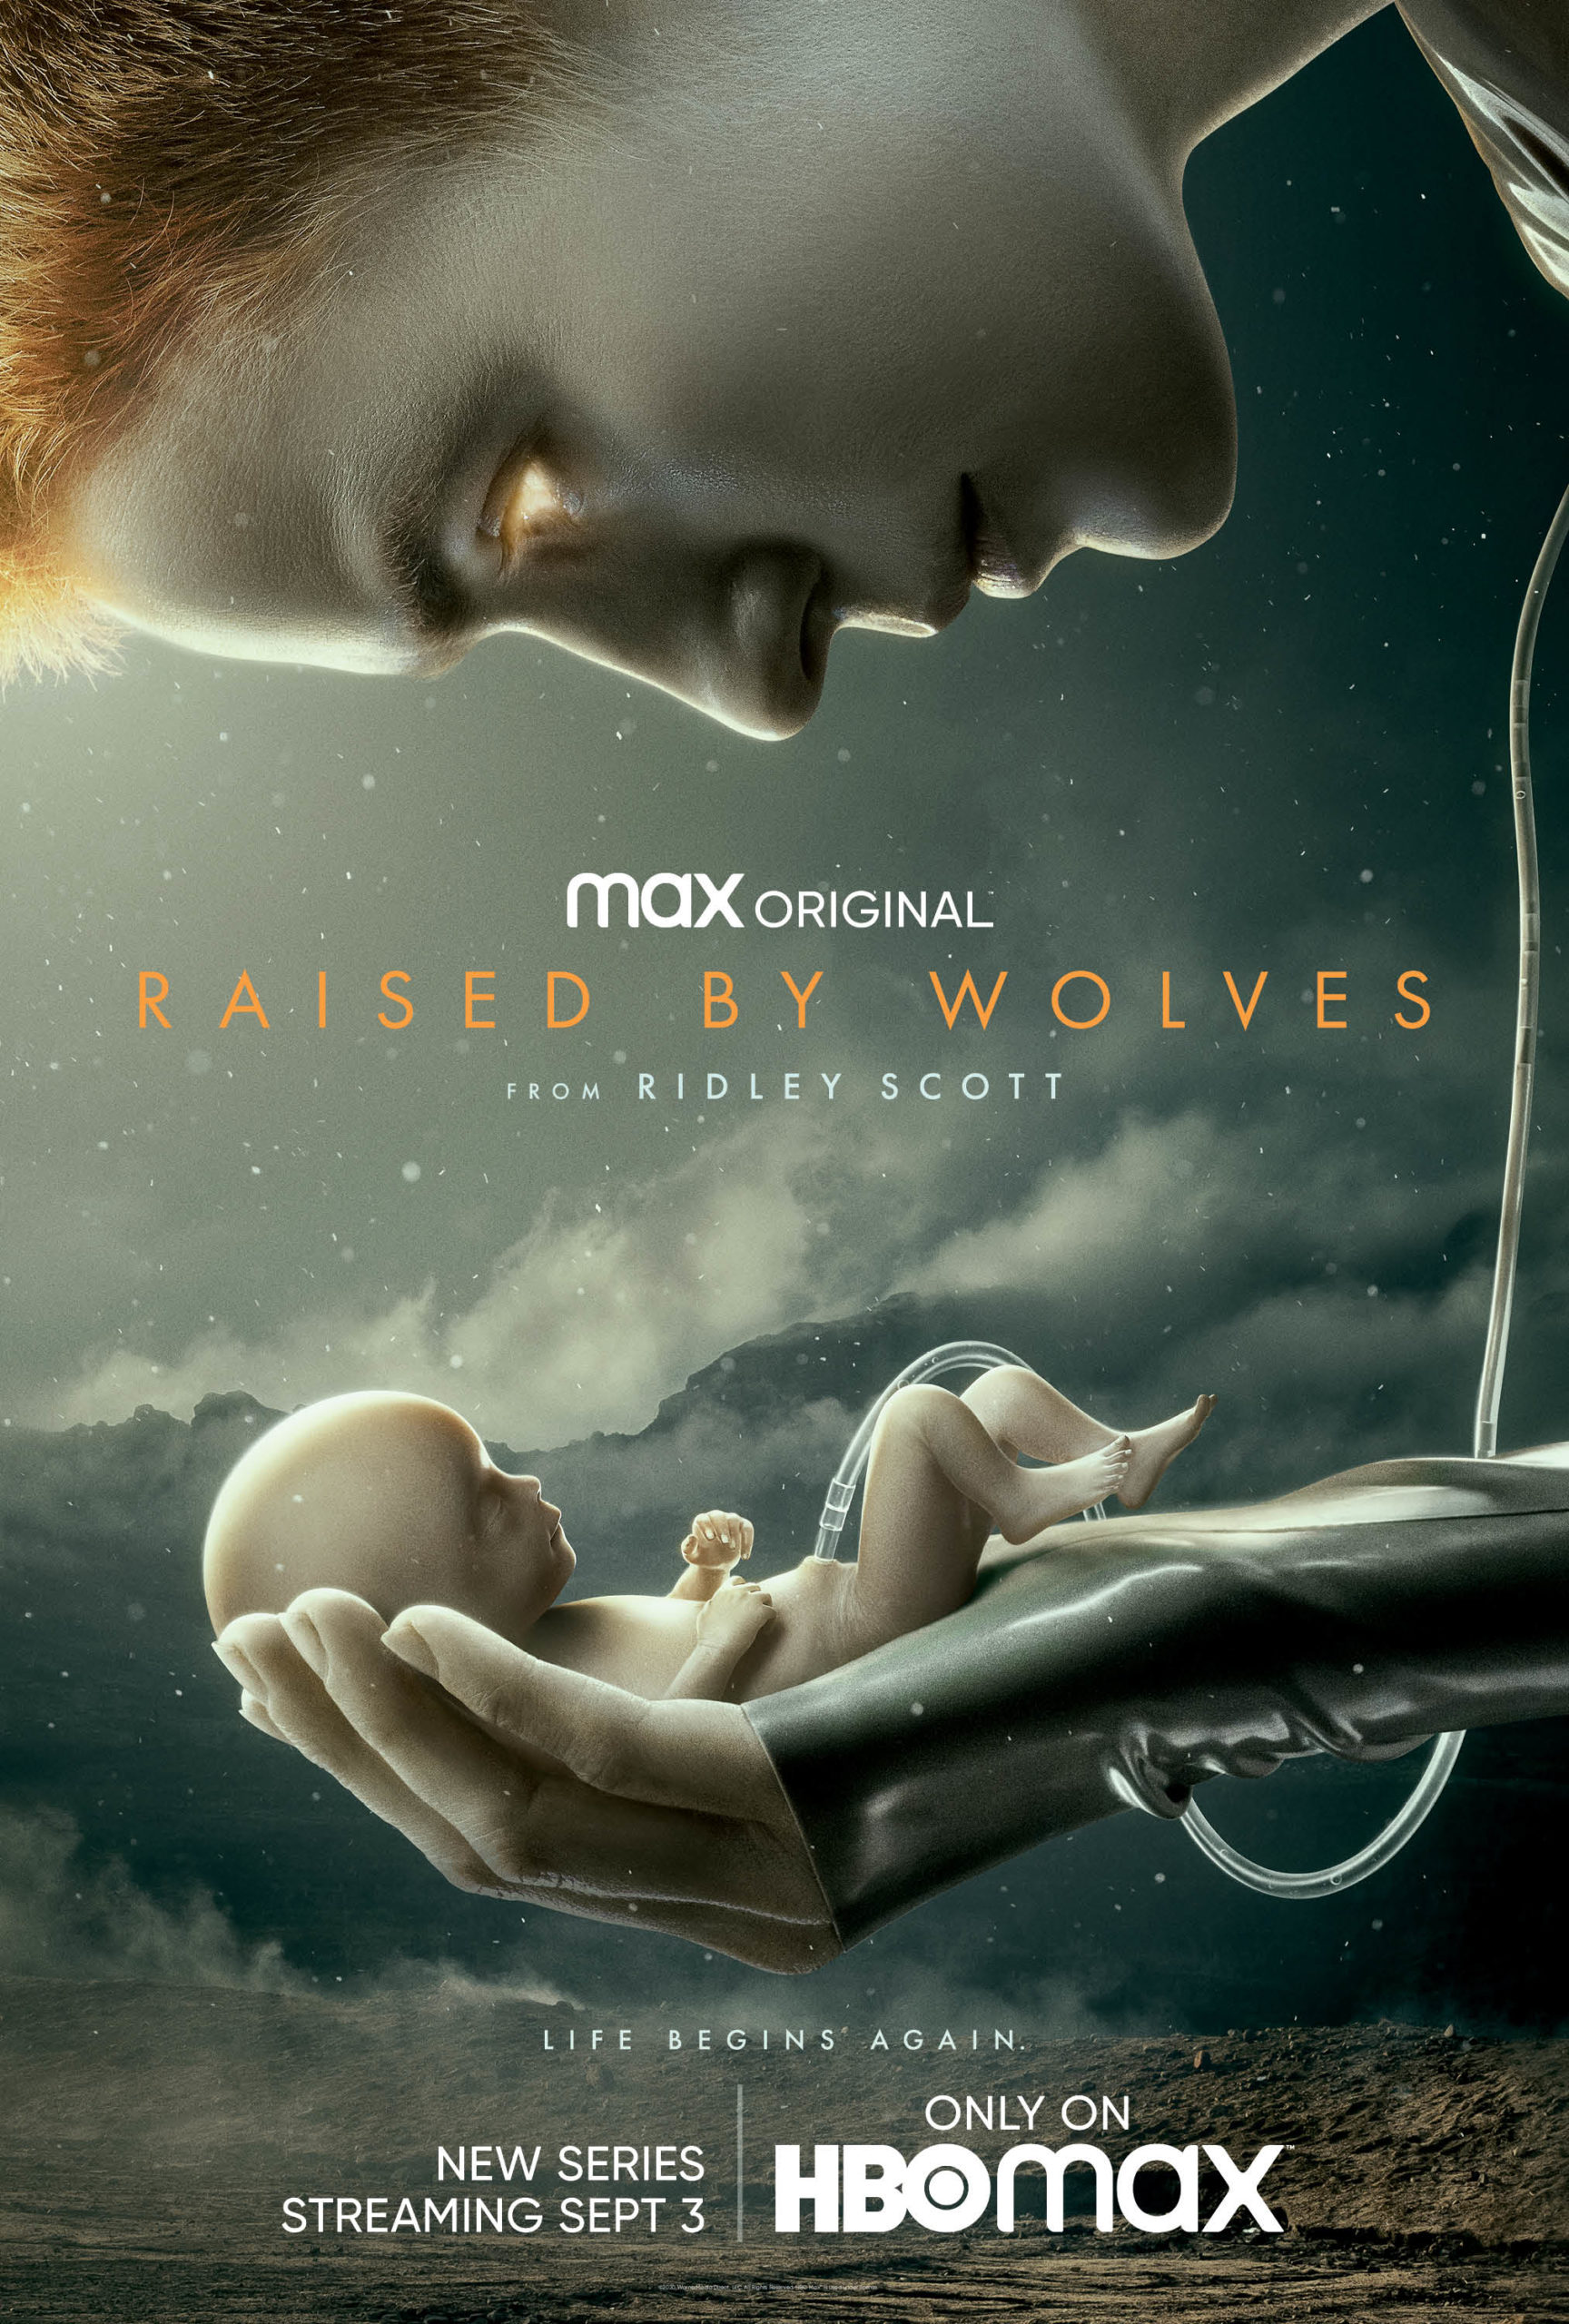 The poster for Raised by Wolves. (Image: HBO Max)